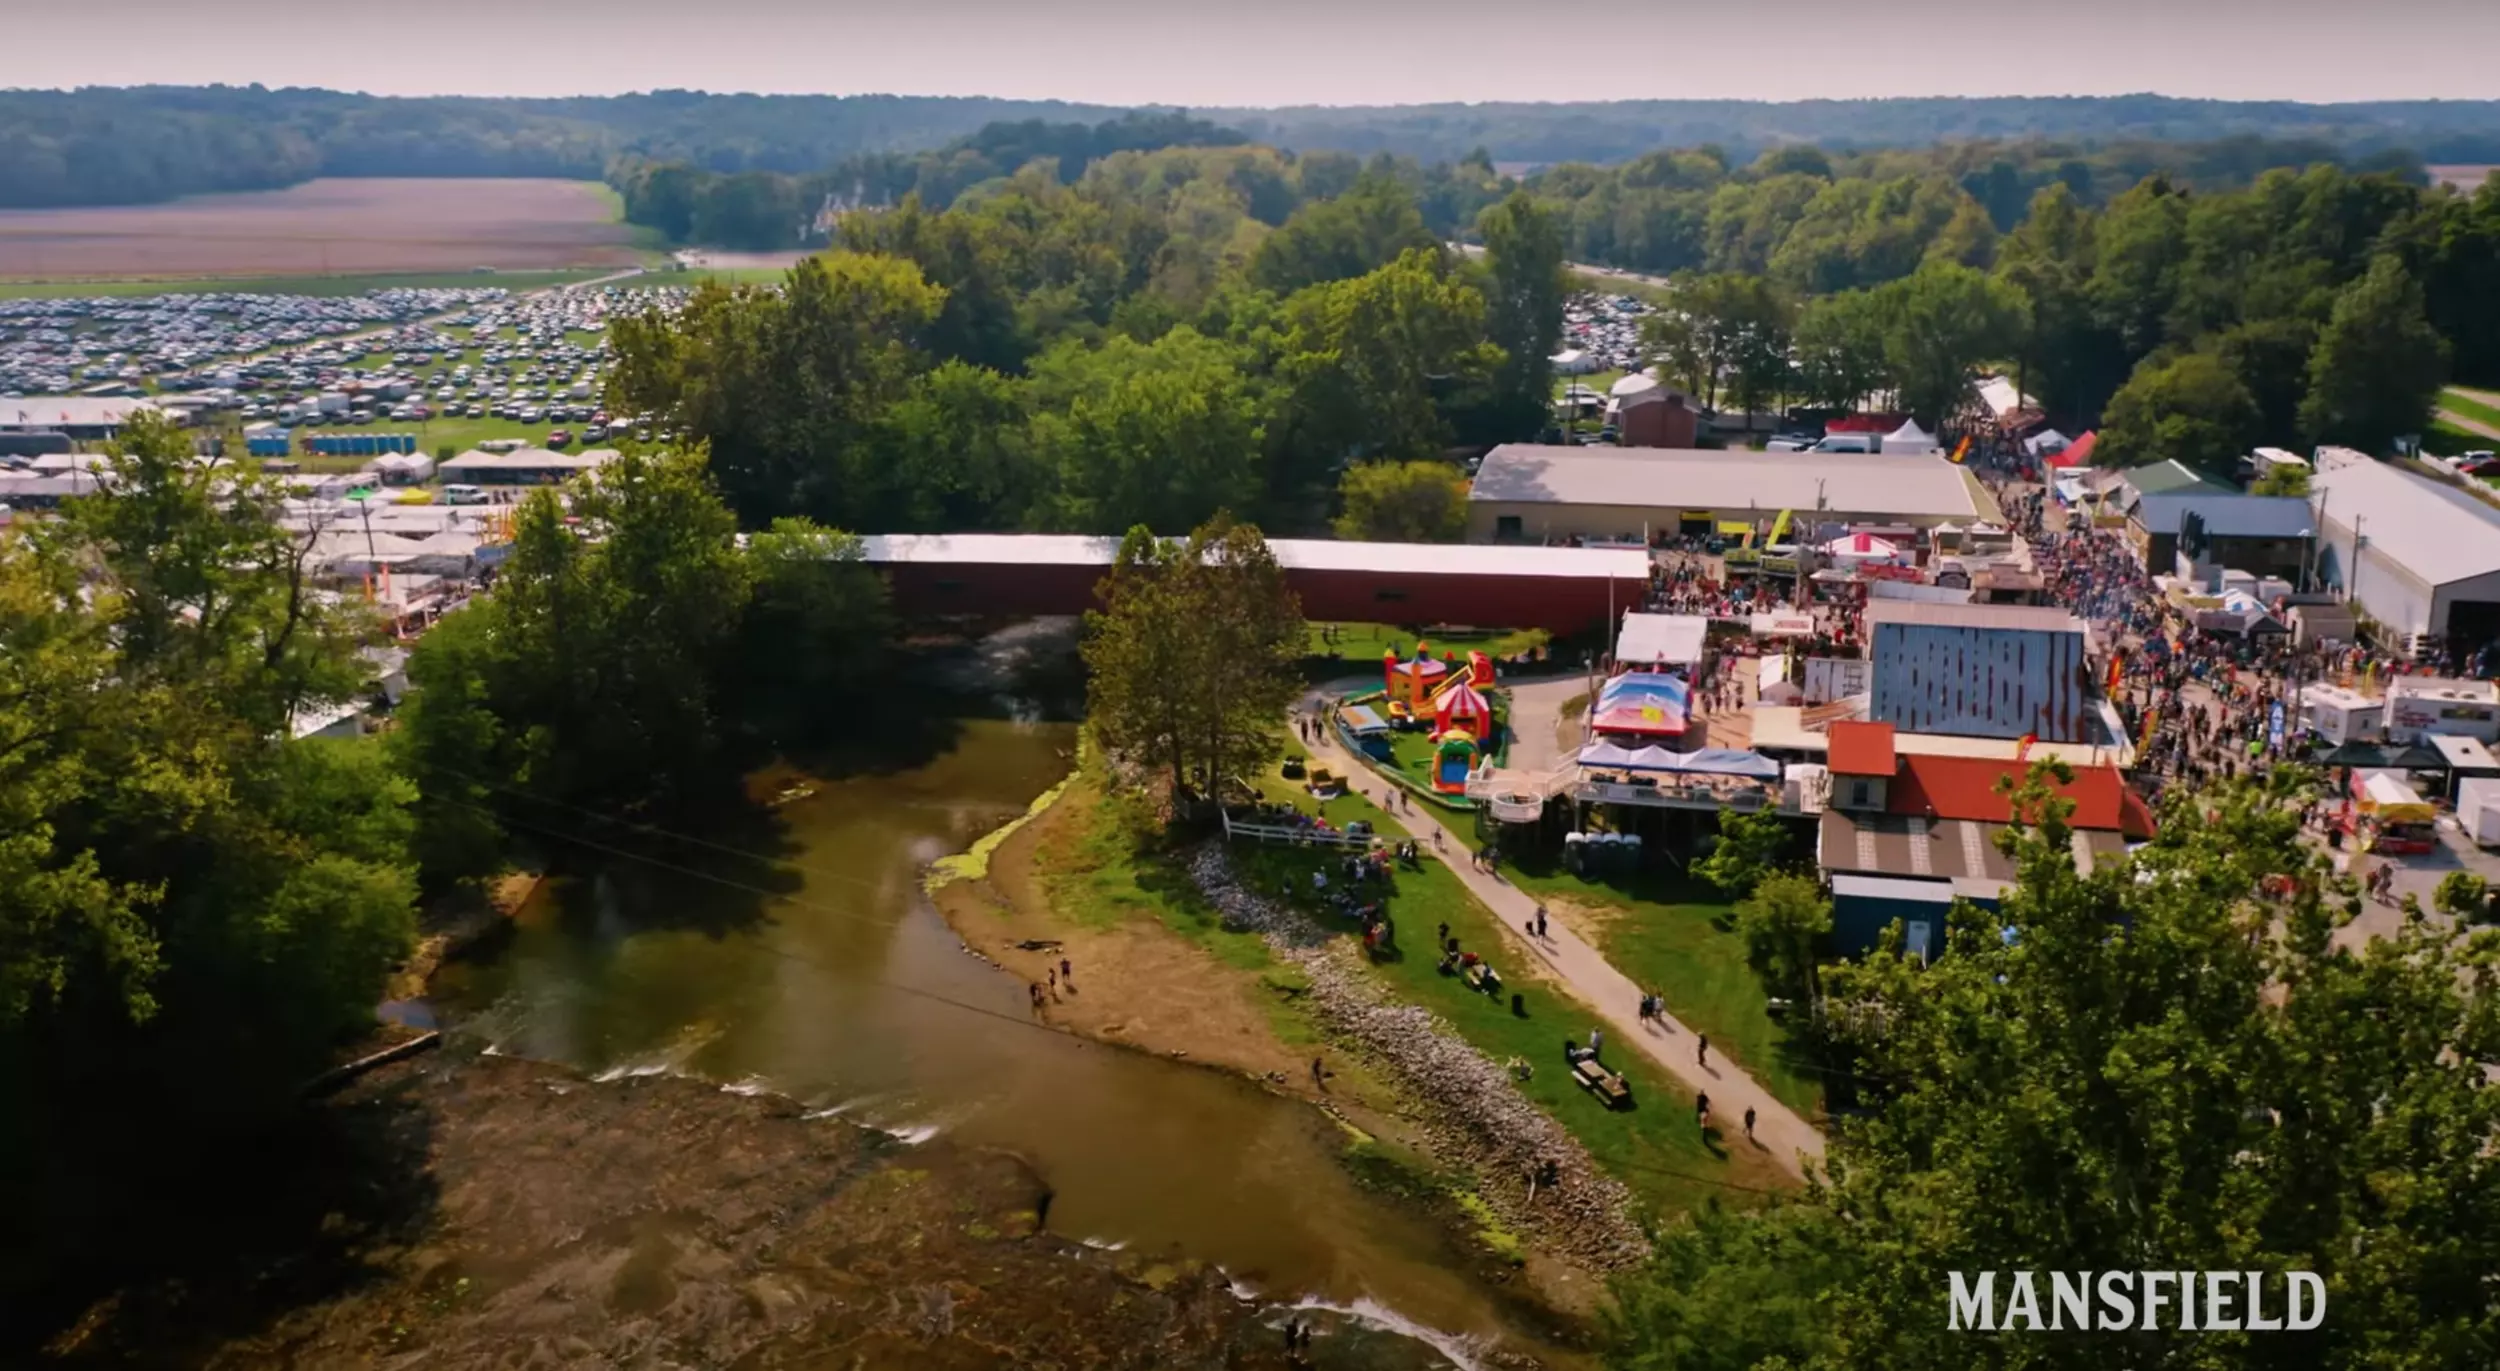 Indiana's World-Famous Covered Bridge Festival is Everything Fall